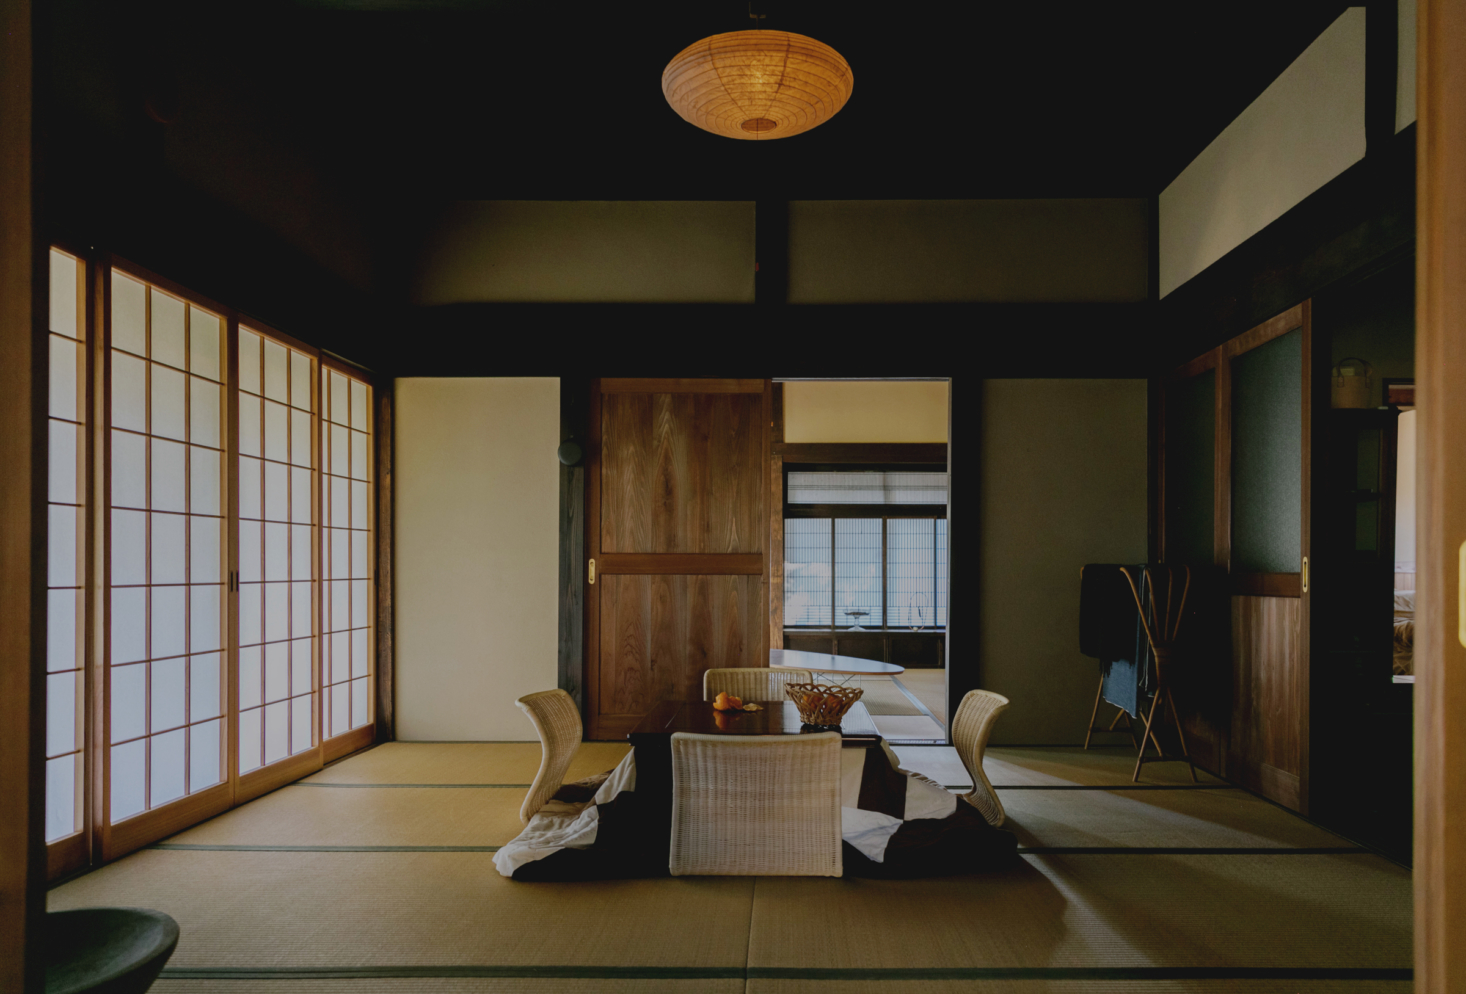 Spirited Away: A Traditional Japanese Home in the Countryside